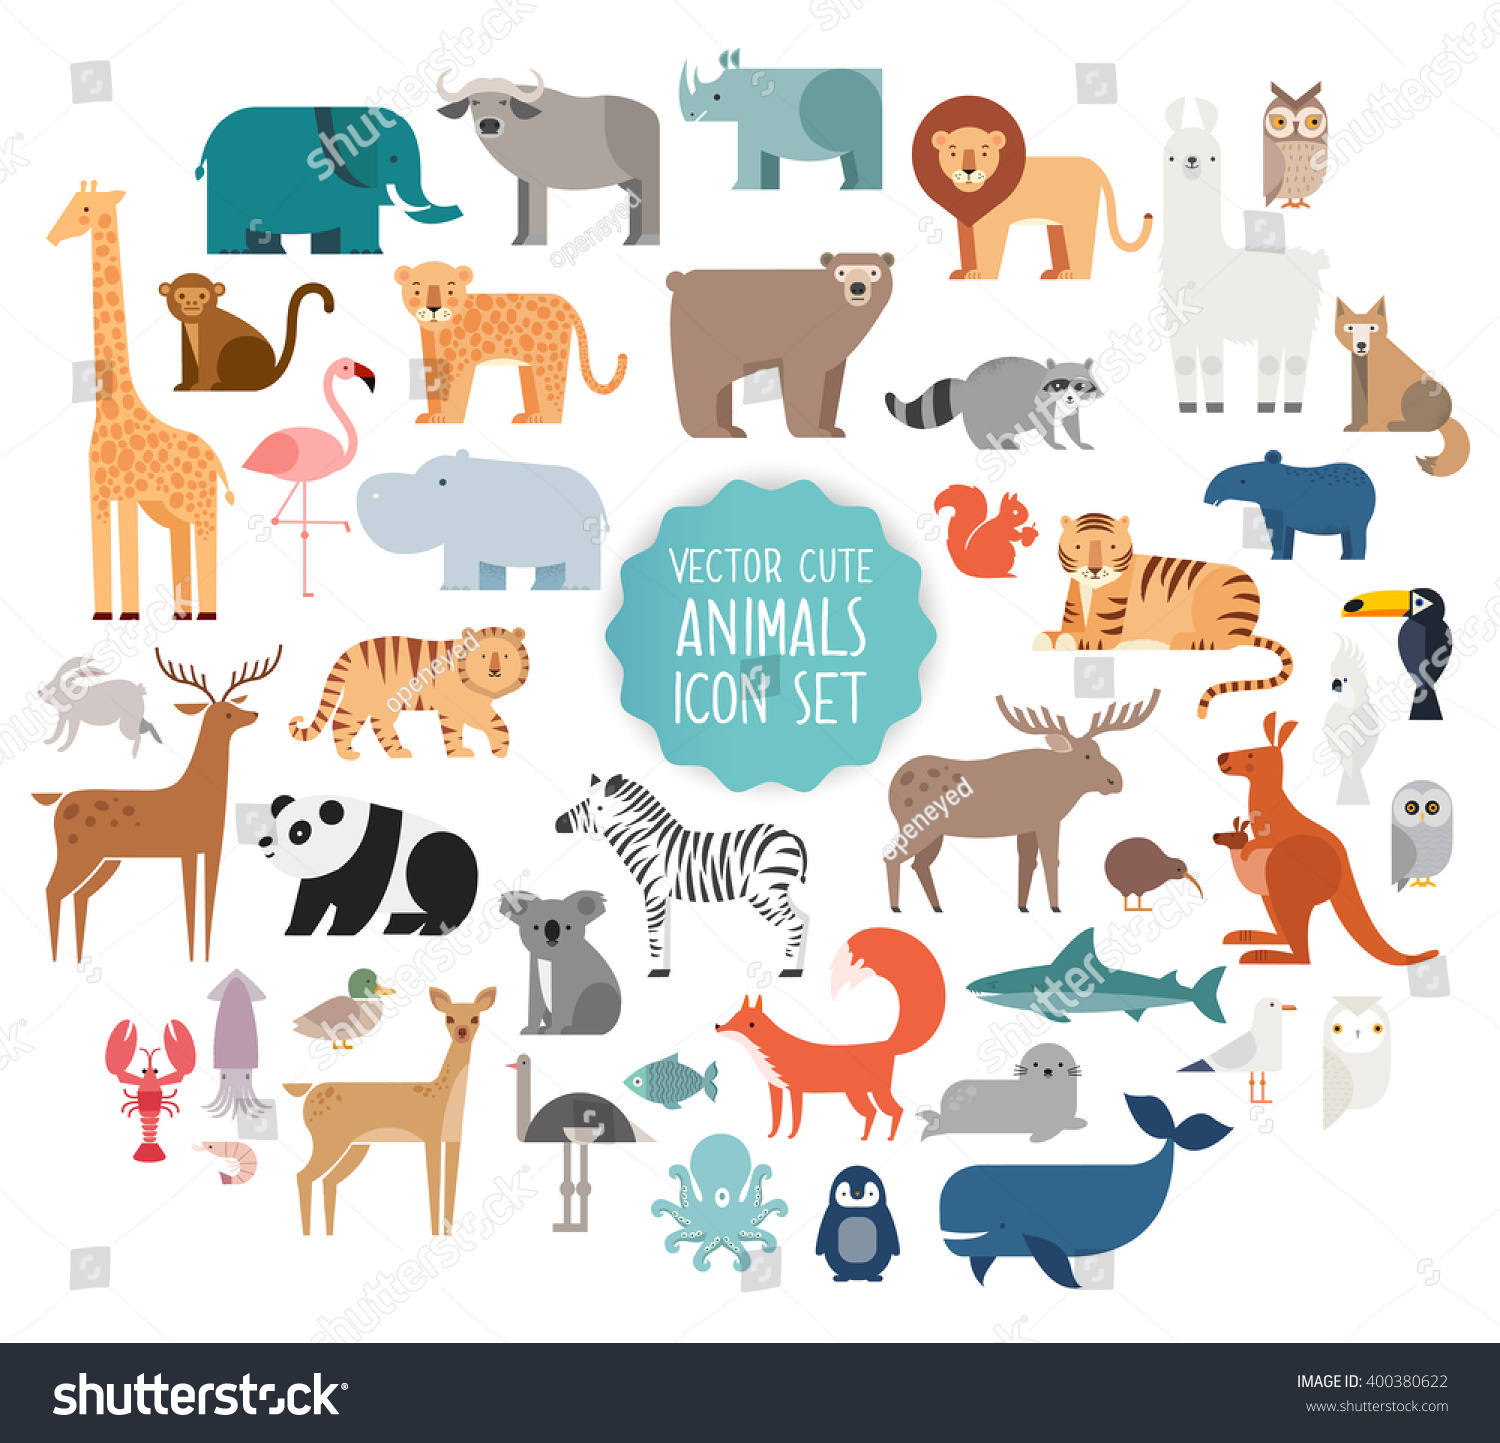 SVG of Cute Animal Vector illustration Icon Set isolated on a white background.  svg